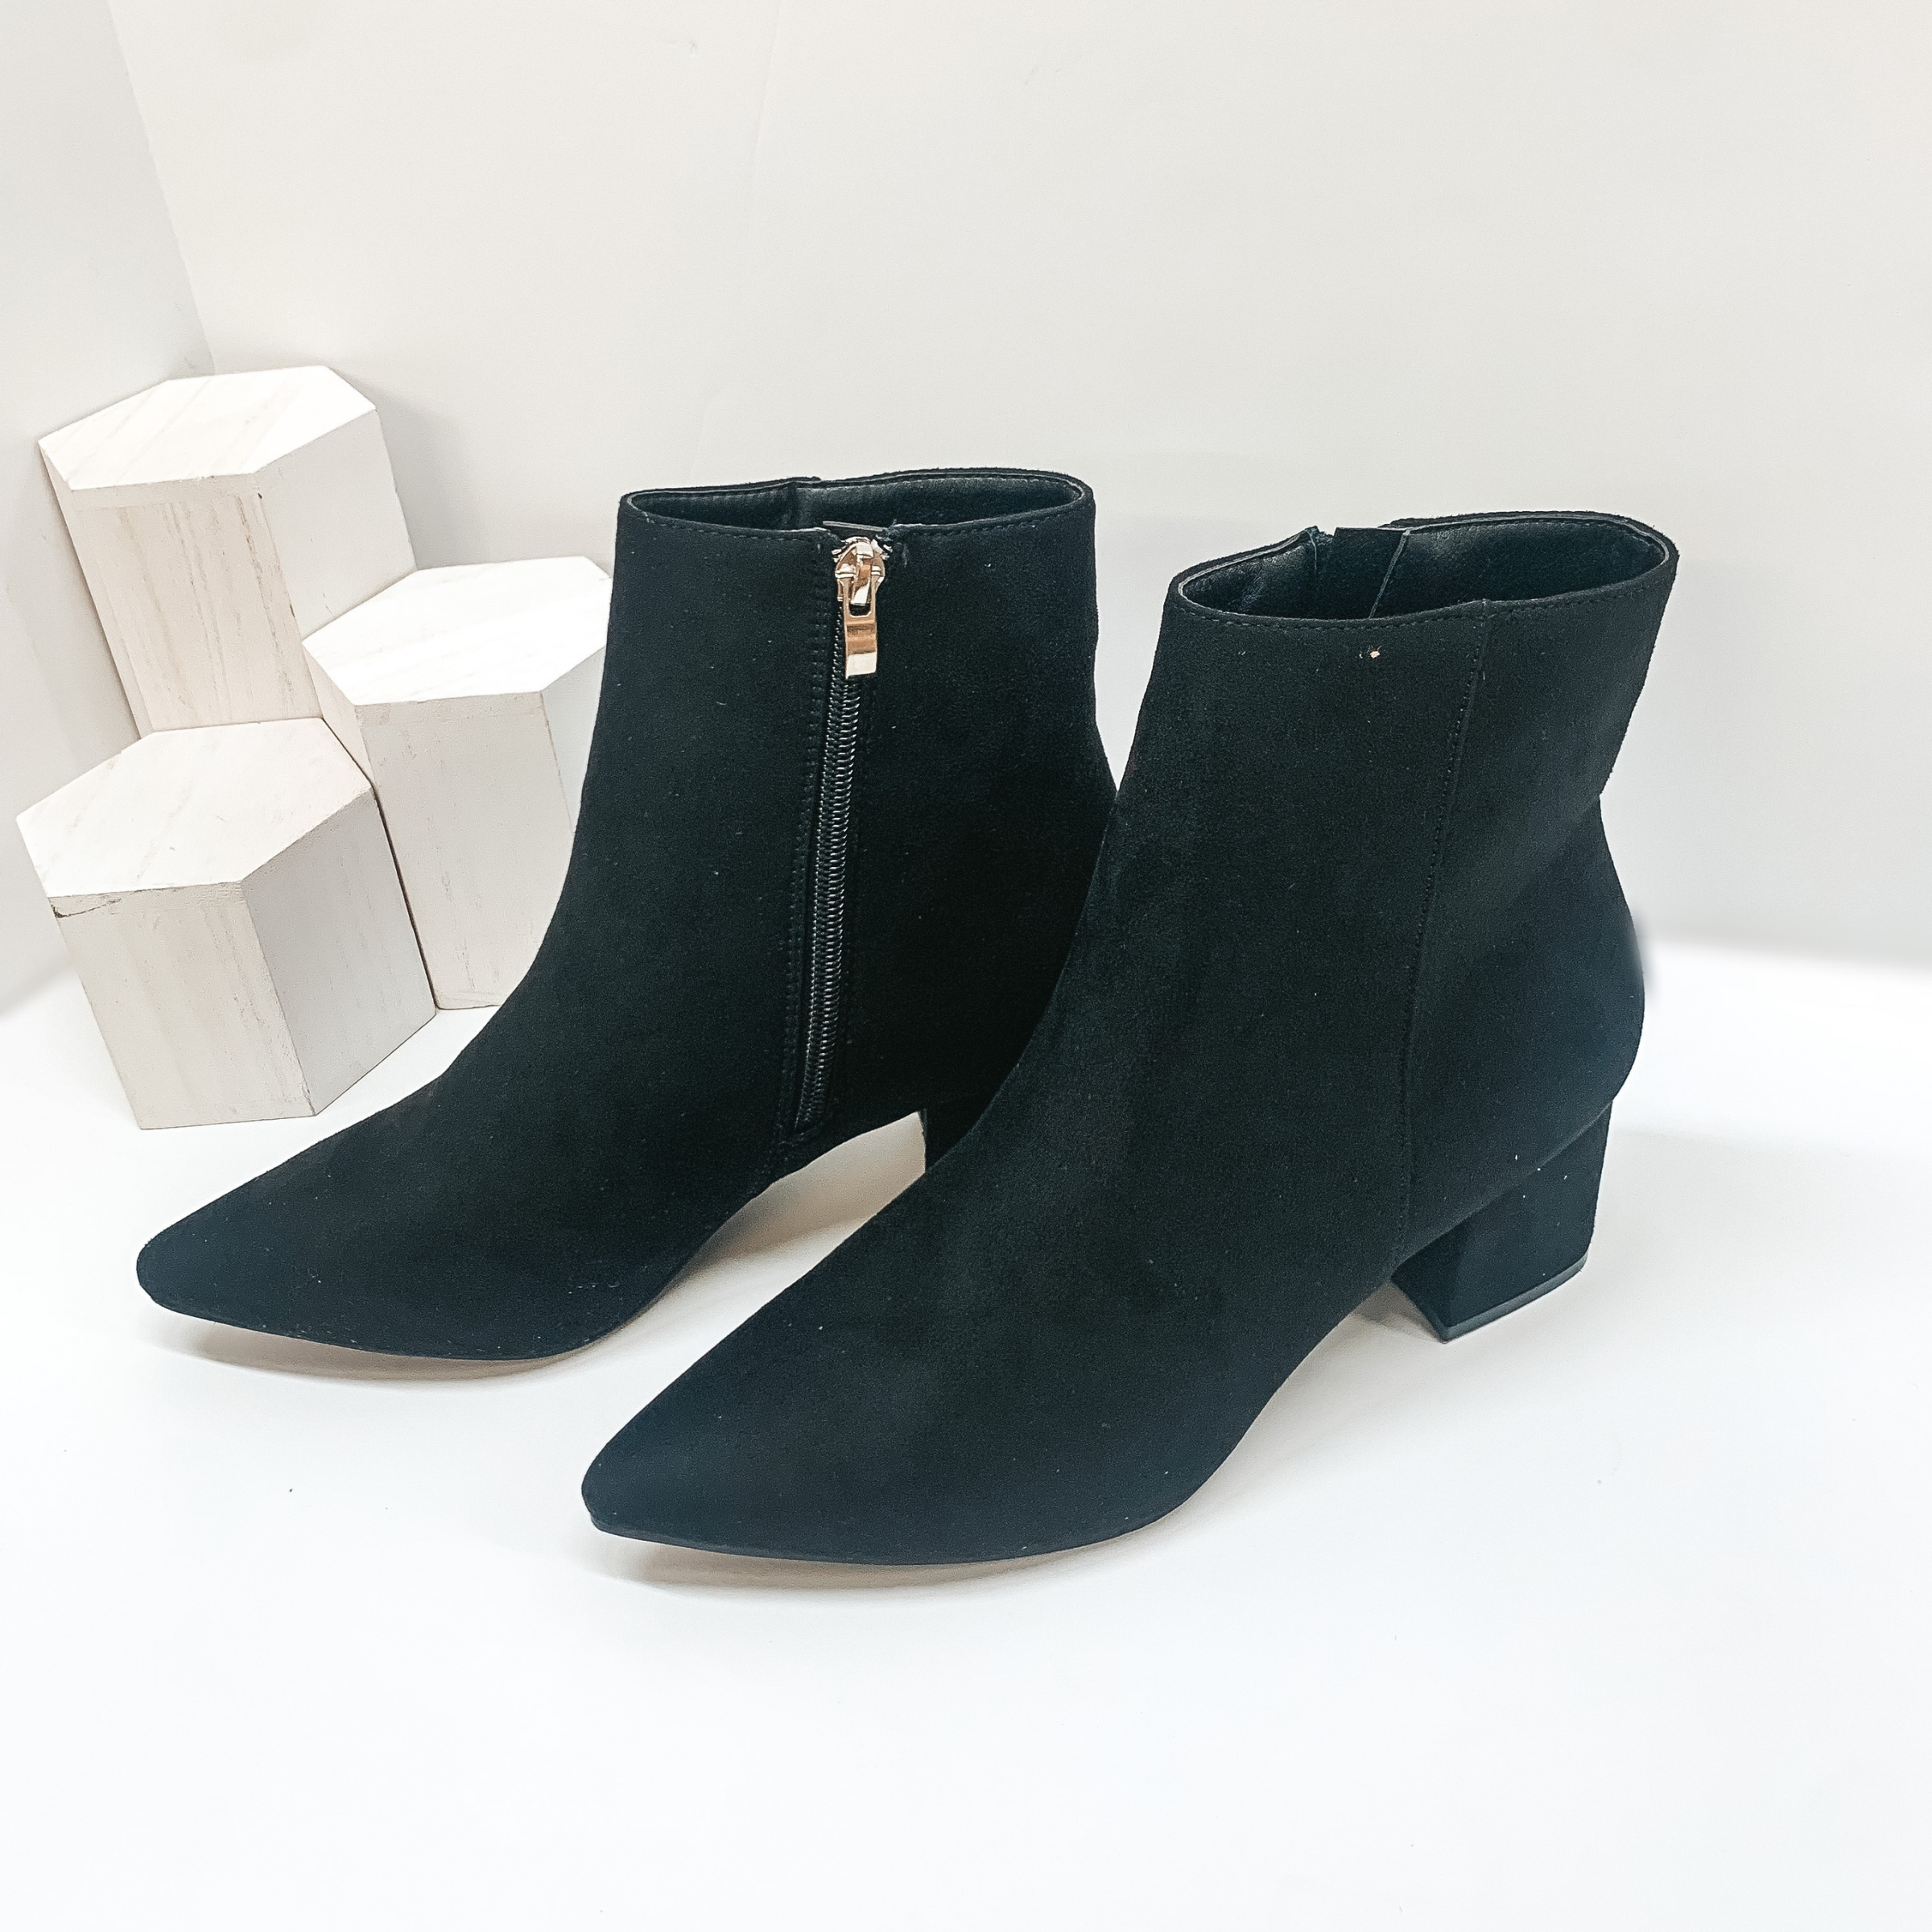 Suede Pointed toe block heel ankle booties with inside ankle zipper closure in black. These booties are pictured on a white background with white blocks in the background. 